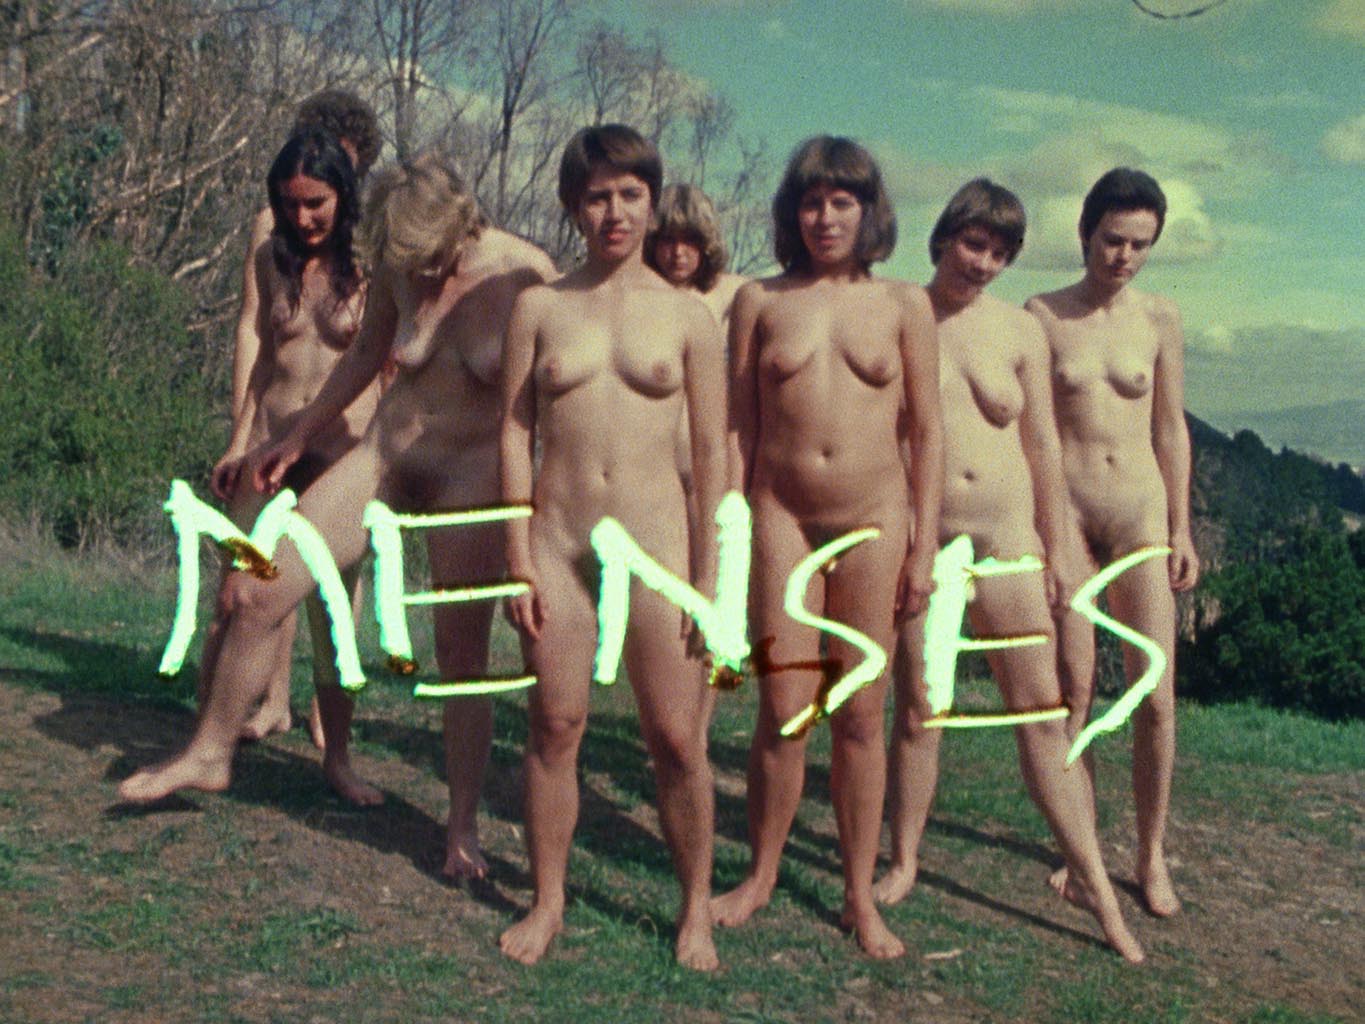 Images from Menses - a film by Barbara Hammer